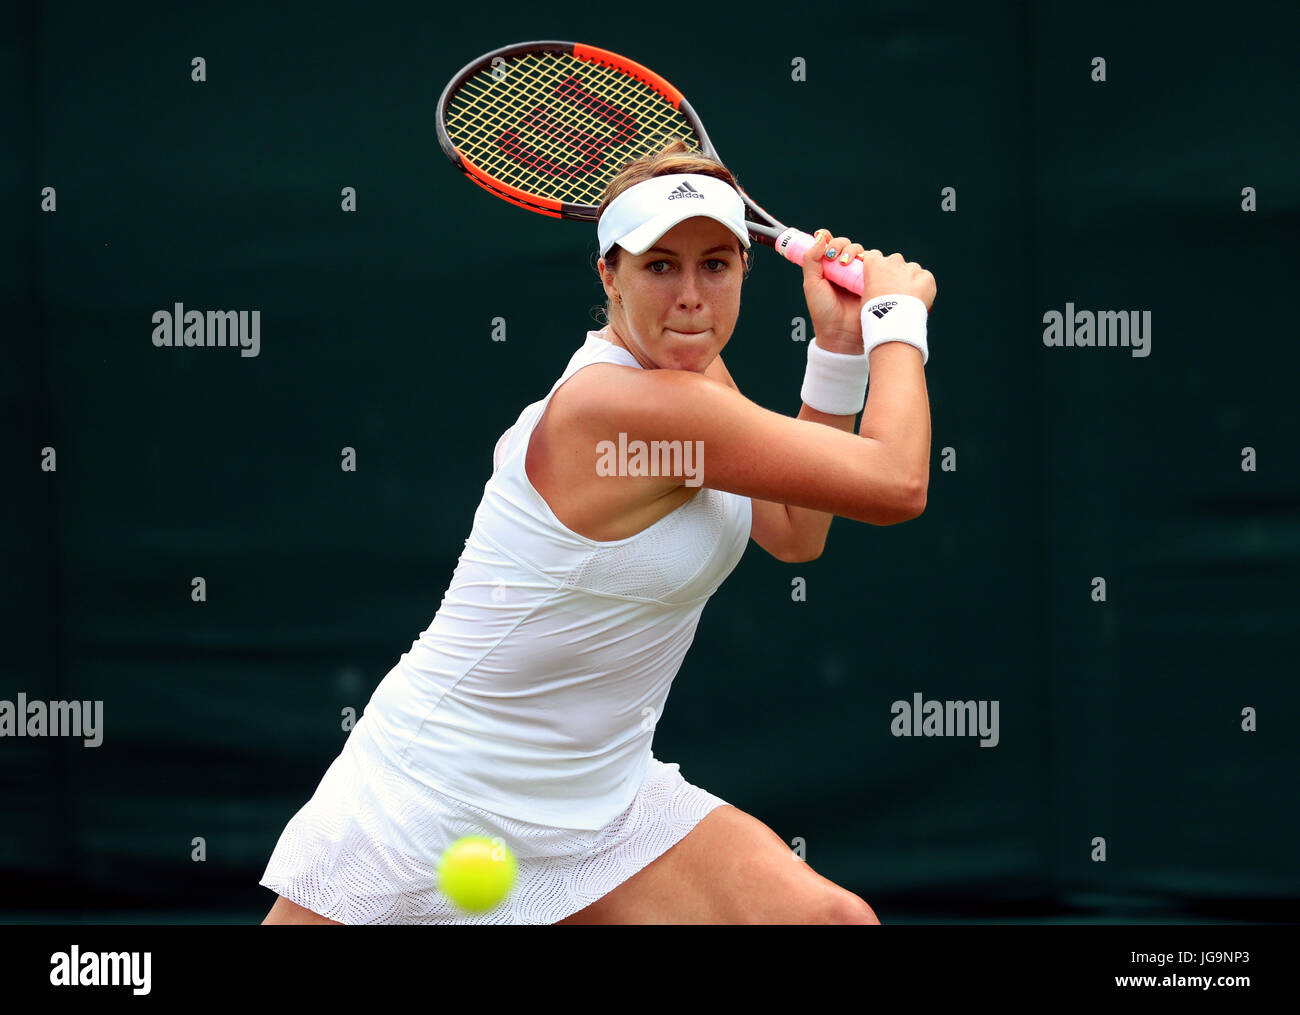 Anastasia Pavlyuchenkova in action against Arina Rodionova on day two of the Wimbledon Championships at The All England Lawn Tennis and Croquet Club, Wimbledon. Stock Photo